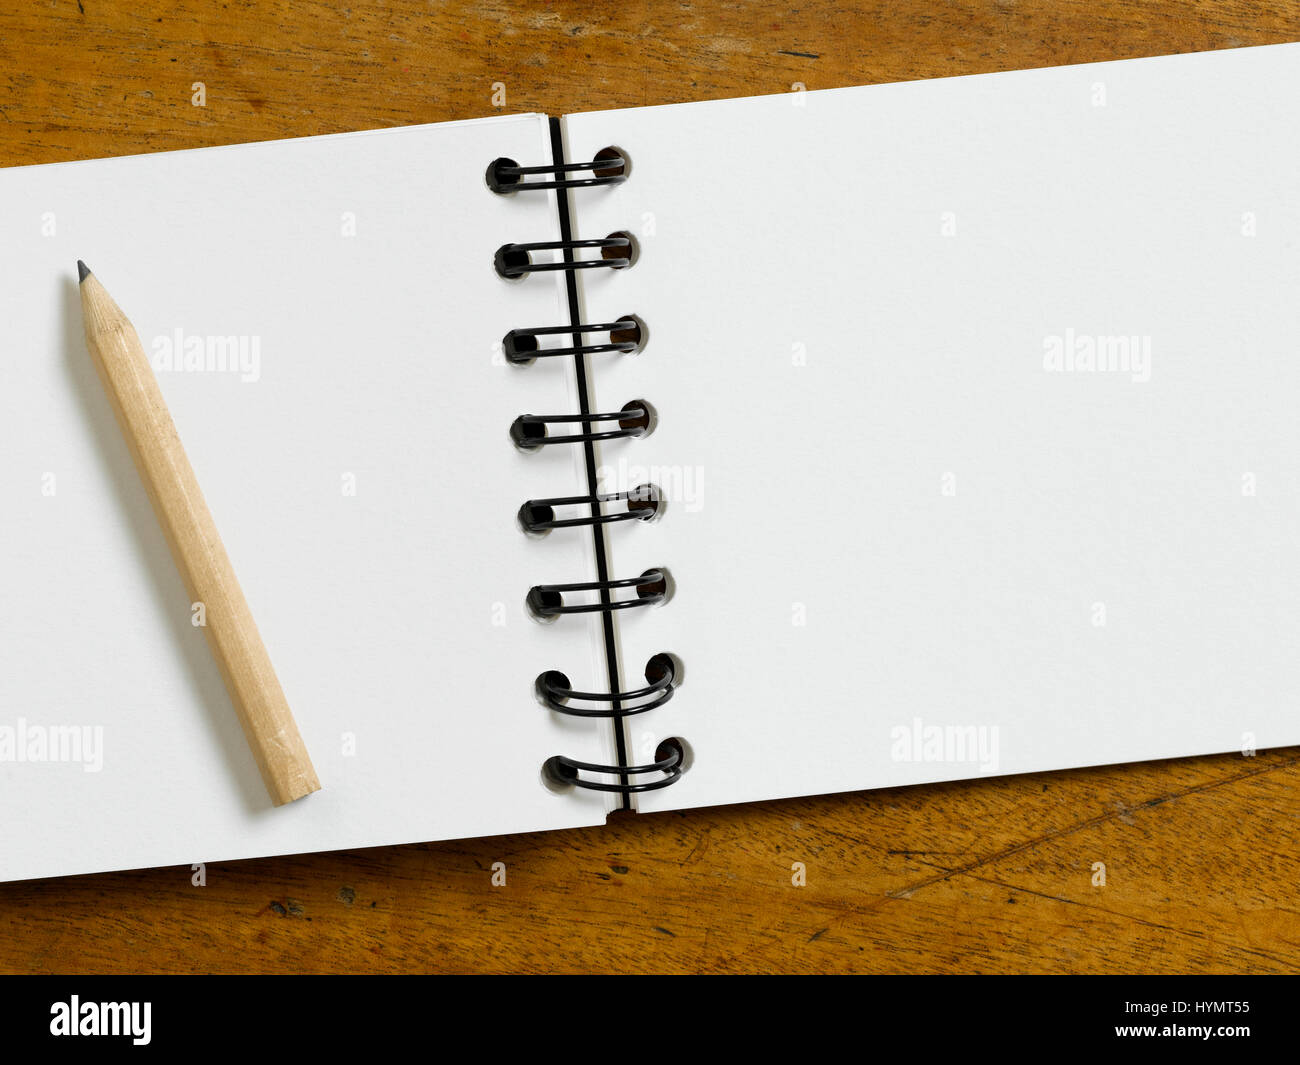 Vintage table top with blank paper Stock Photo